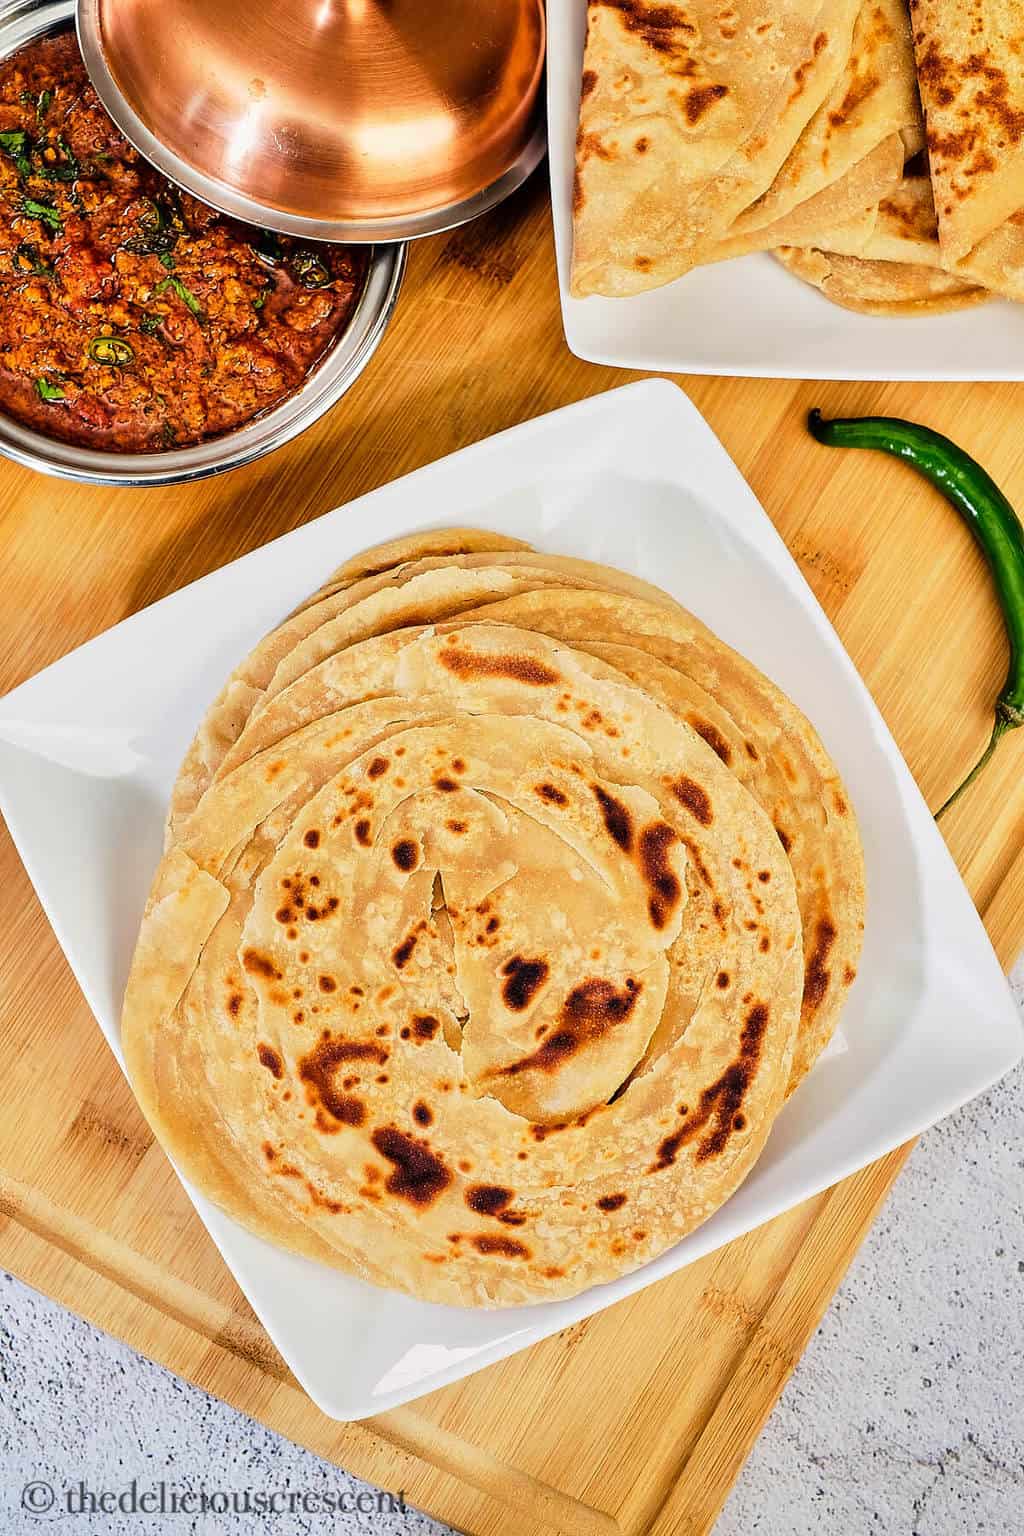 Round layered Indian breads served on the table.